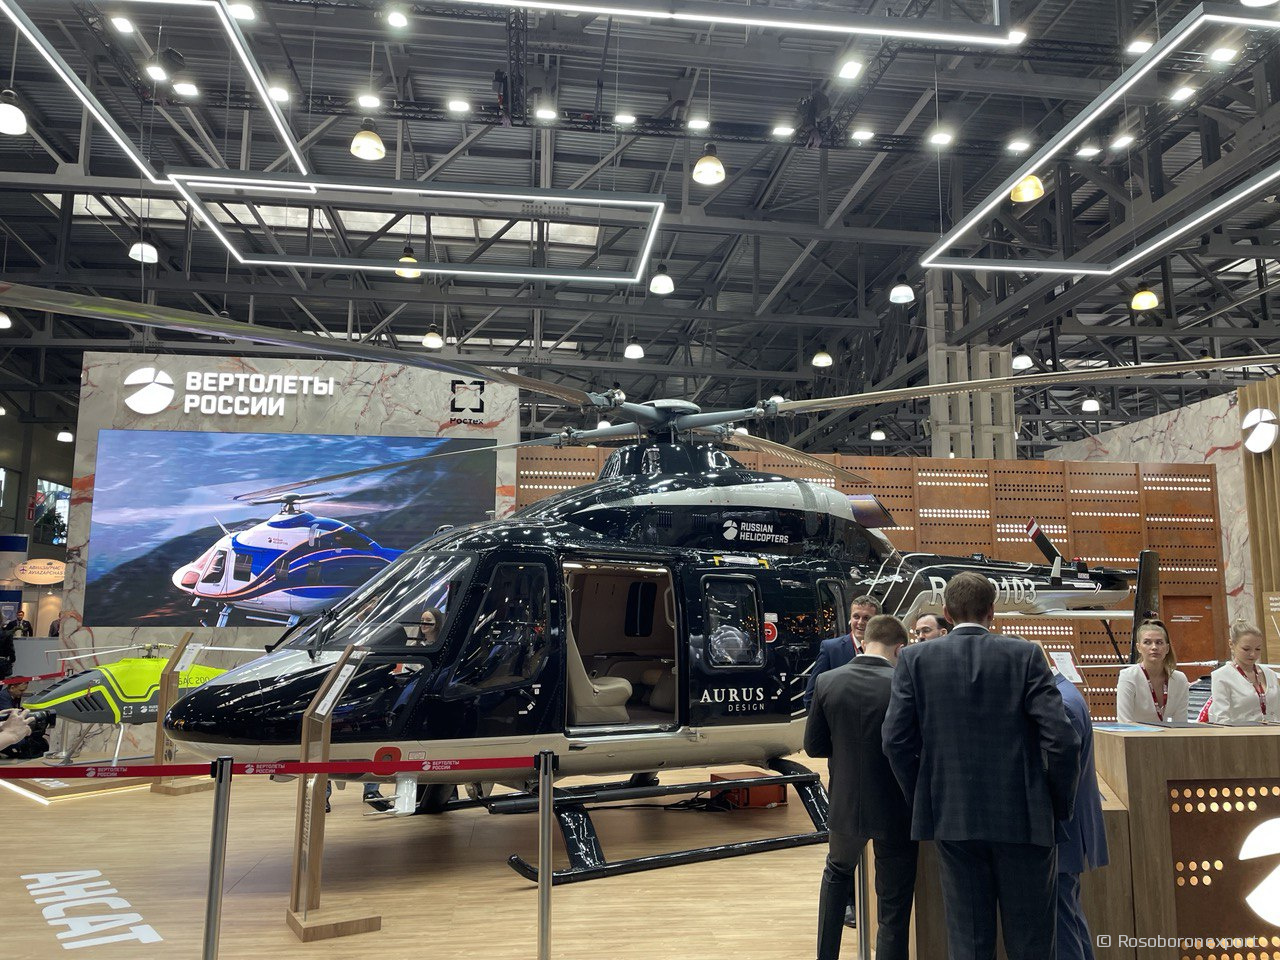 Rotary-Wing Premieres at HeliRussia